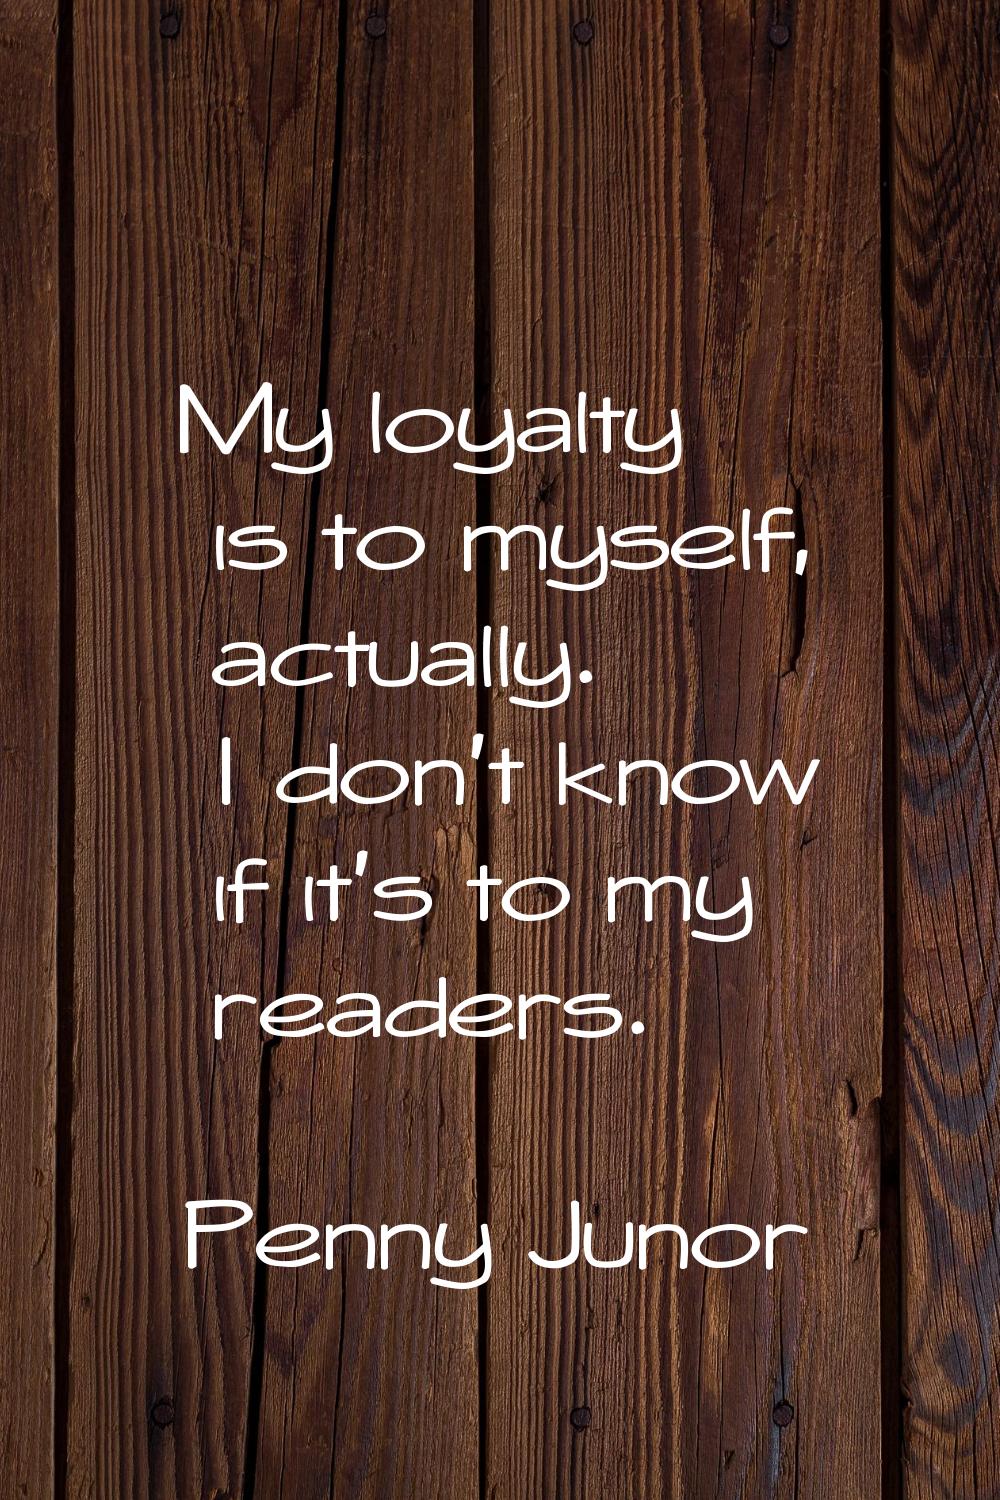 My loyalty is to myself, actually. I don't know if it's to my readers.